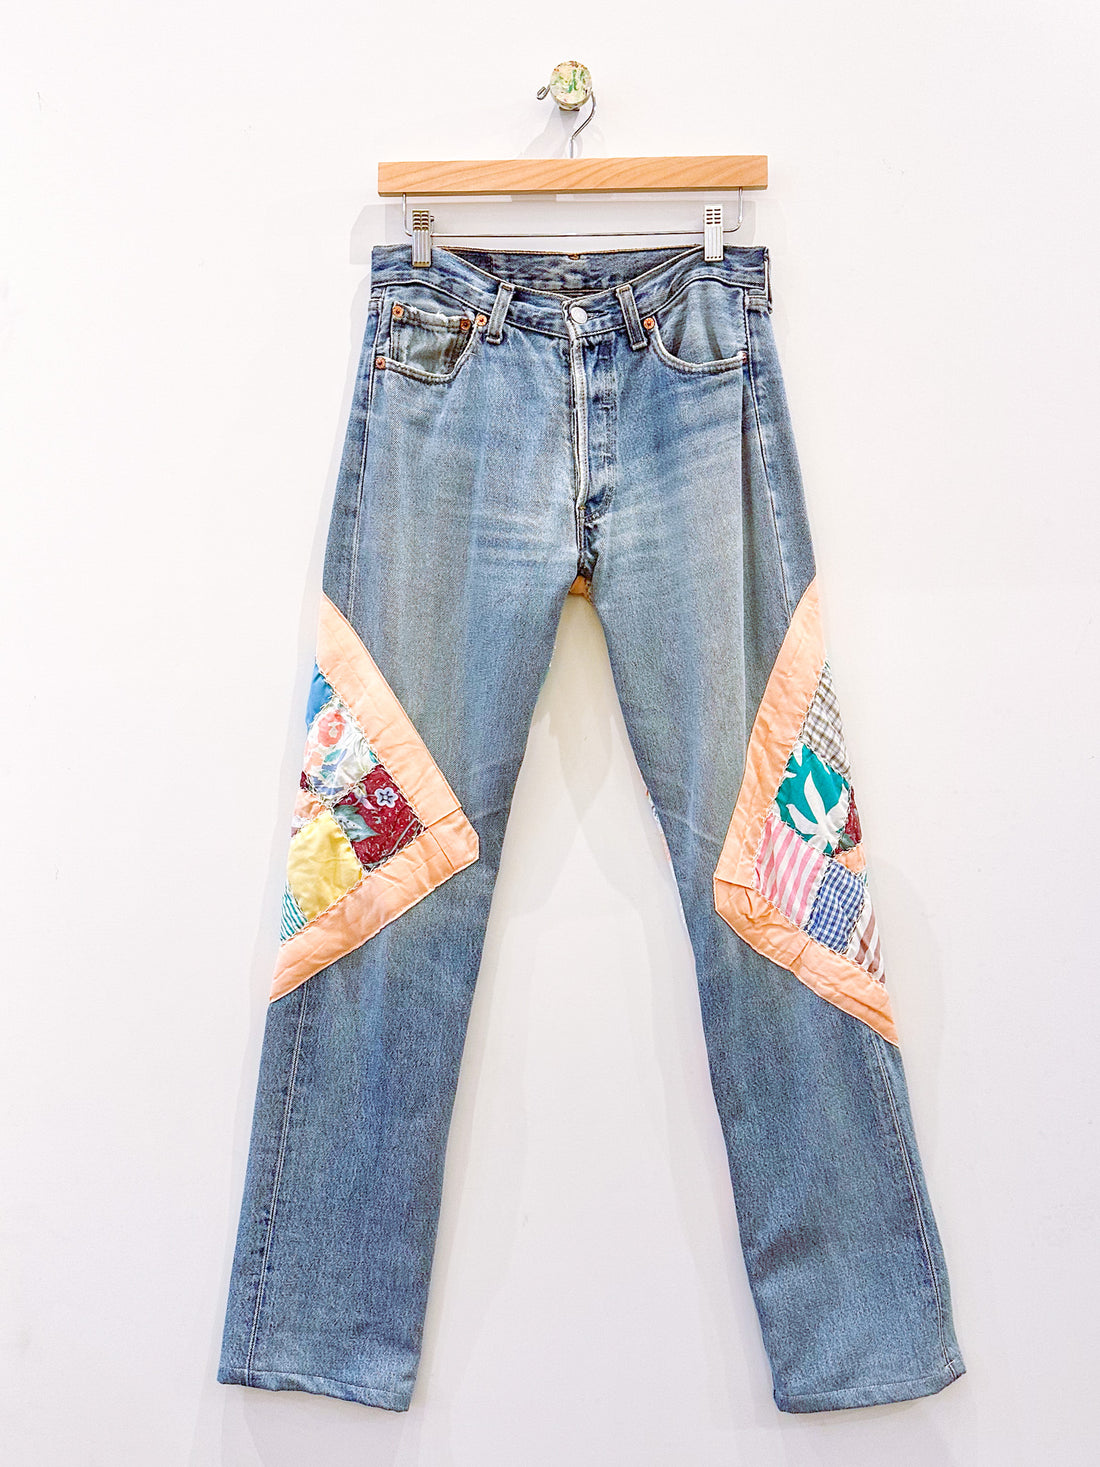 Reworked Patchwork Levi’s 501’s